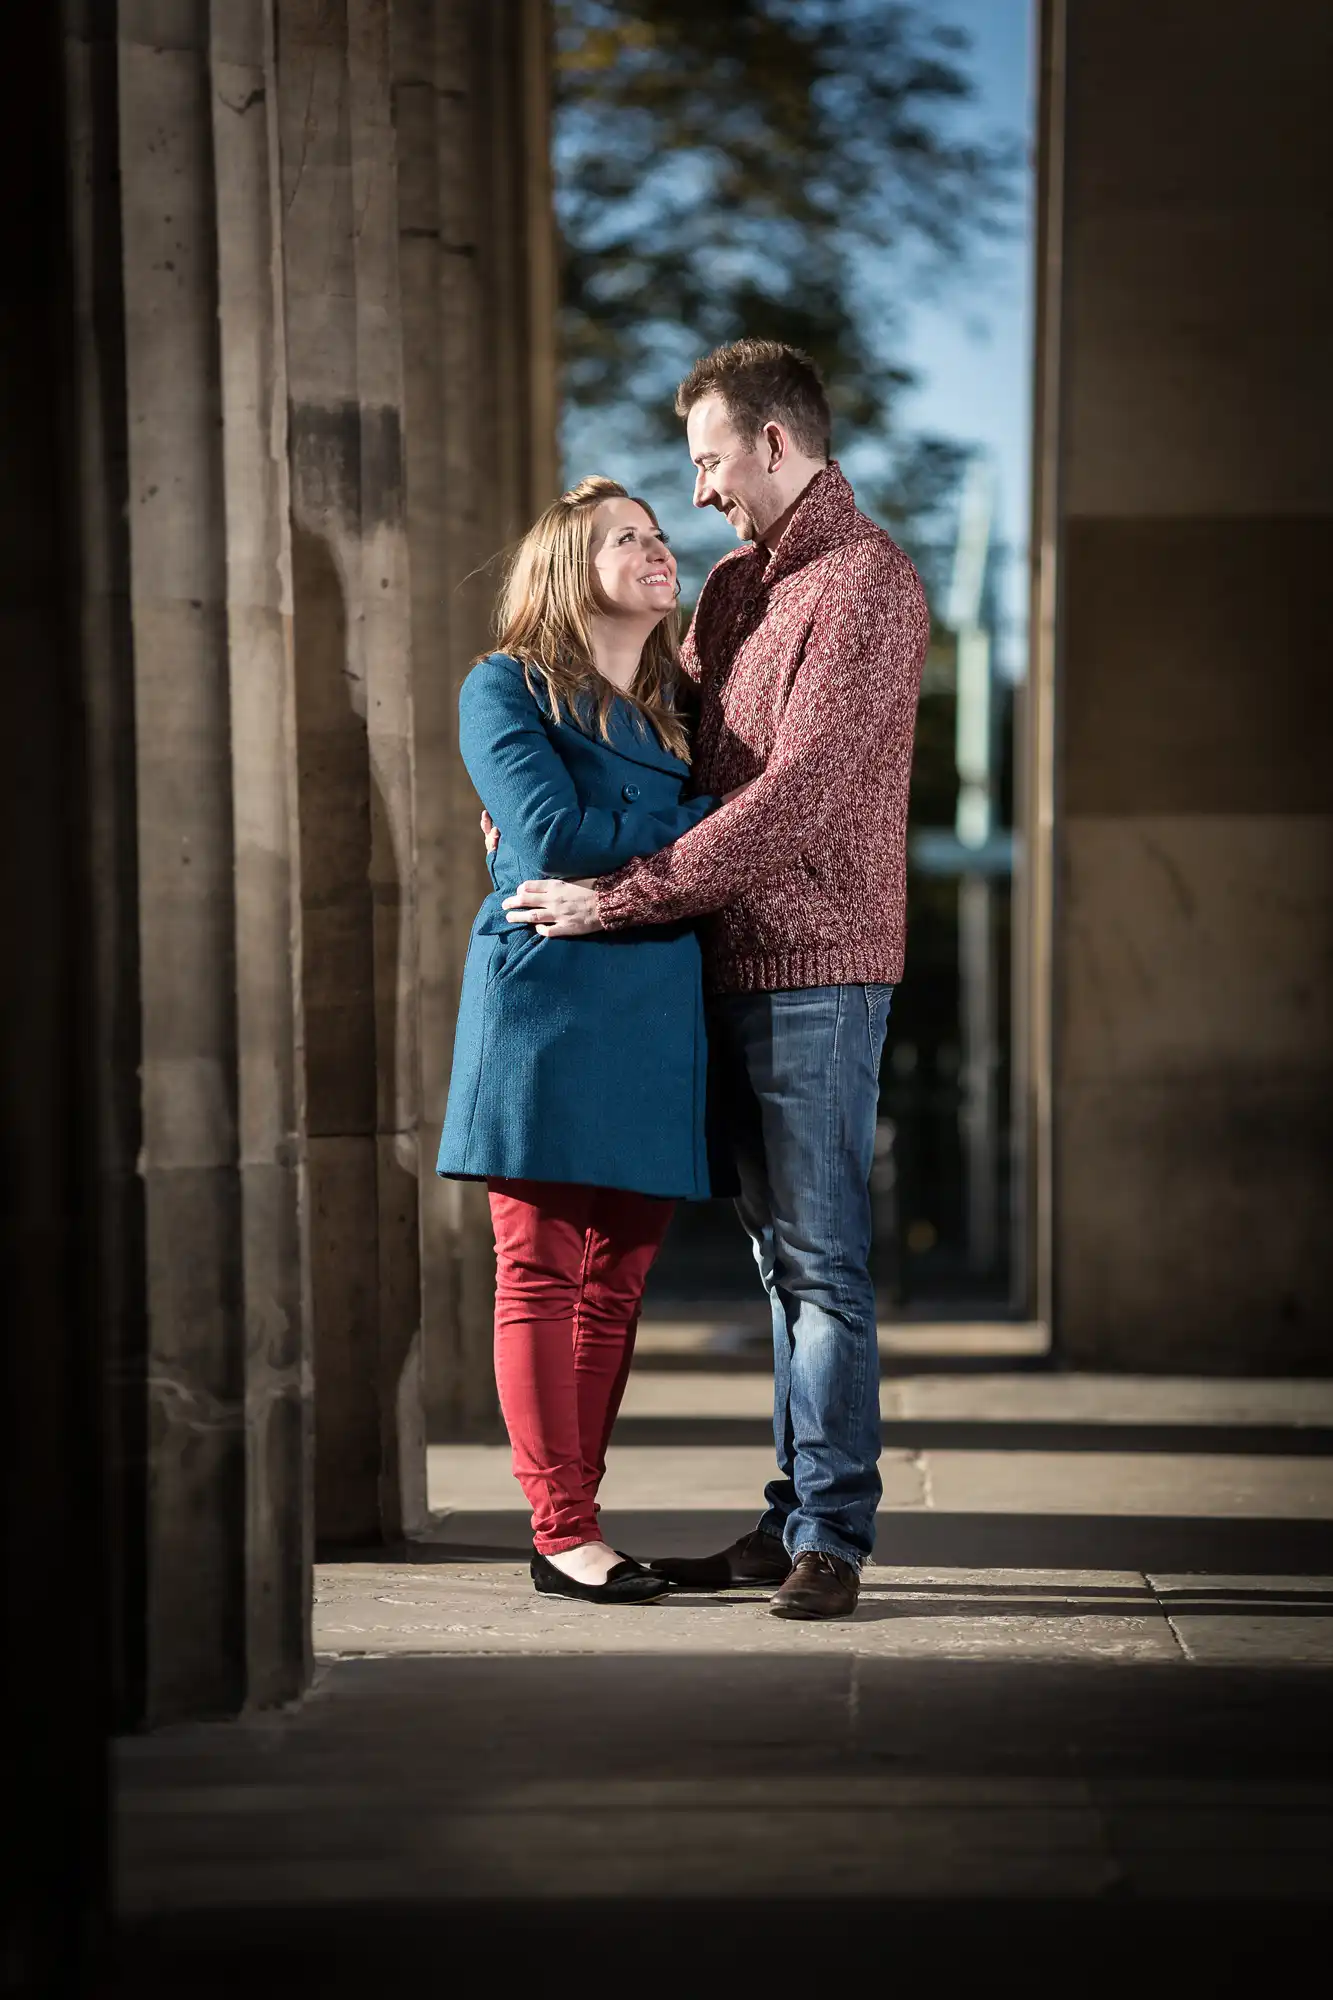 A couple embracing and smiling at each other between concrete columns, the woman in a blue coat and the man in a red sweater.